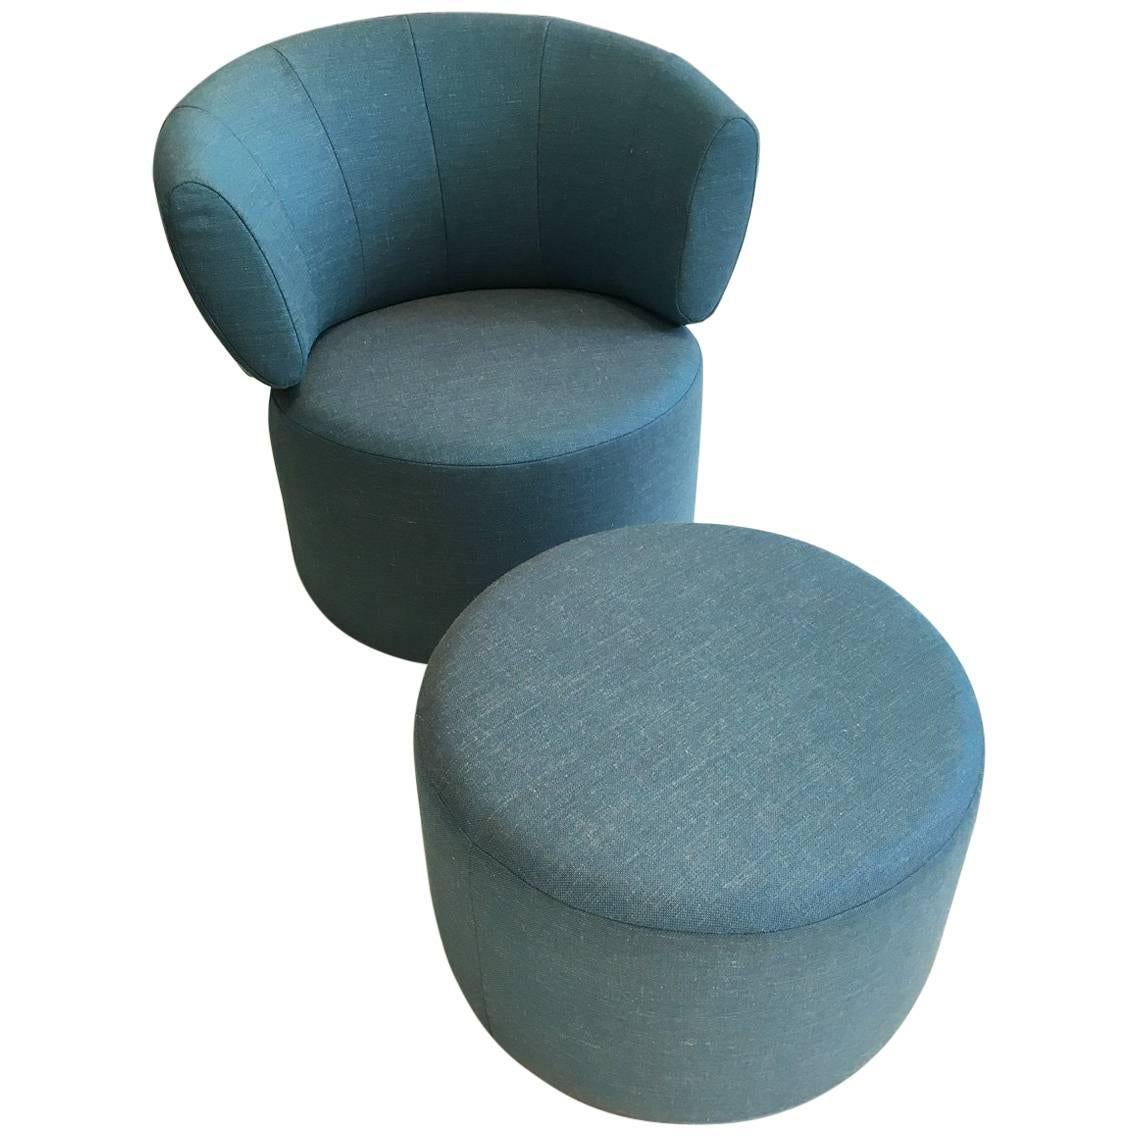 RB 684 Swivelling Armchair and Ottoman in Aqua Blue Fabric by Rolf Benz